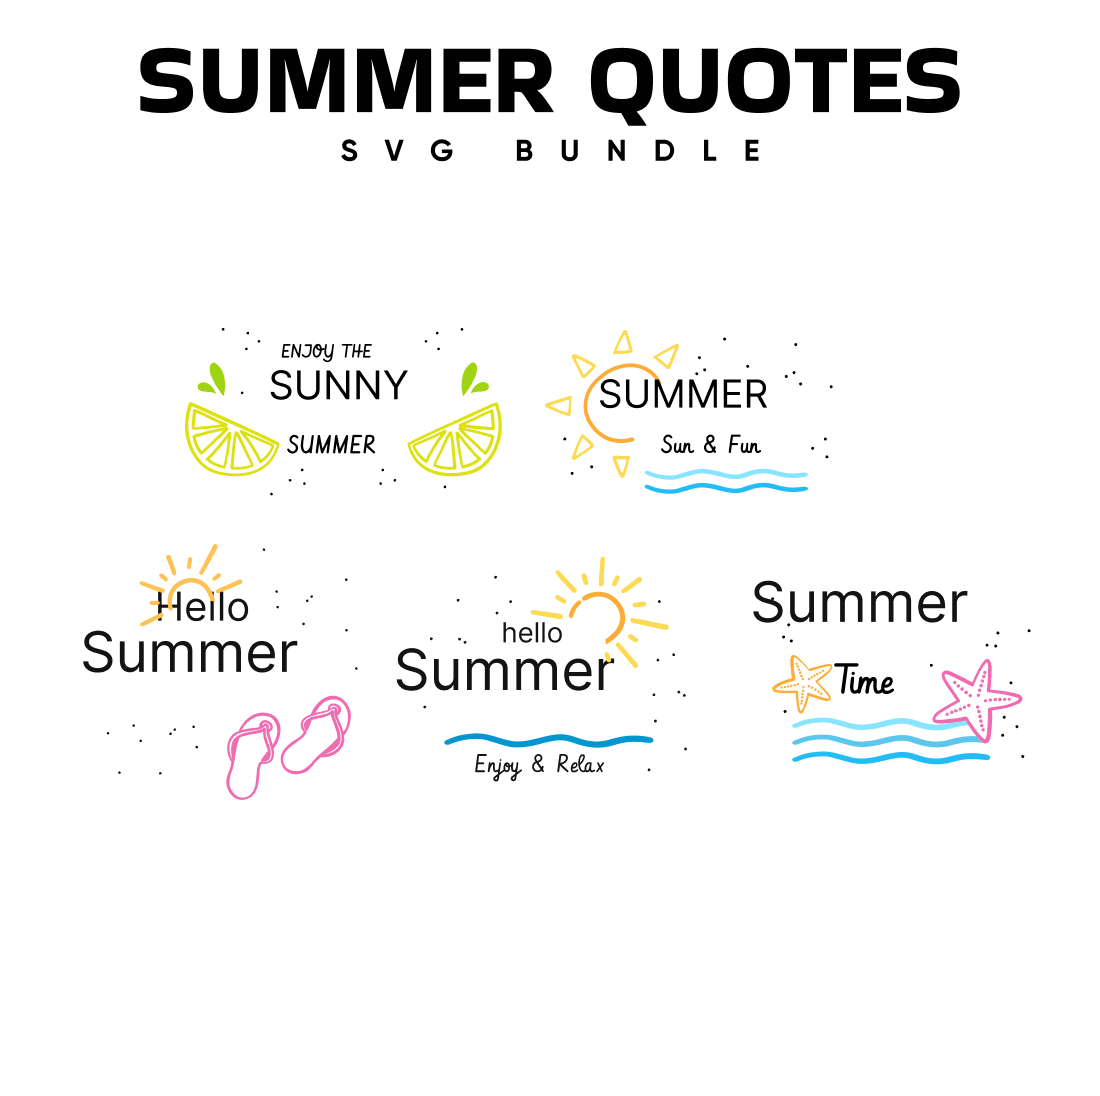 Summer Quotes SVG.